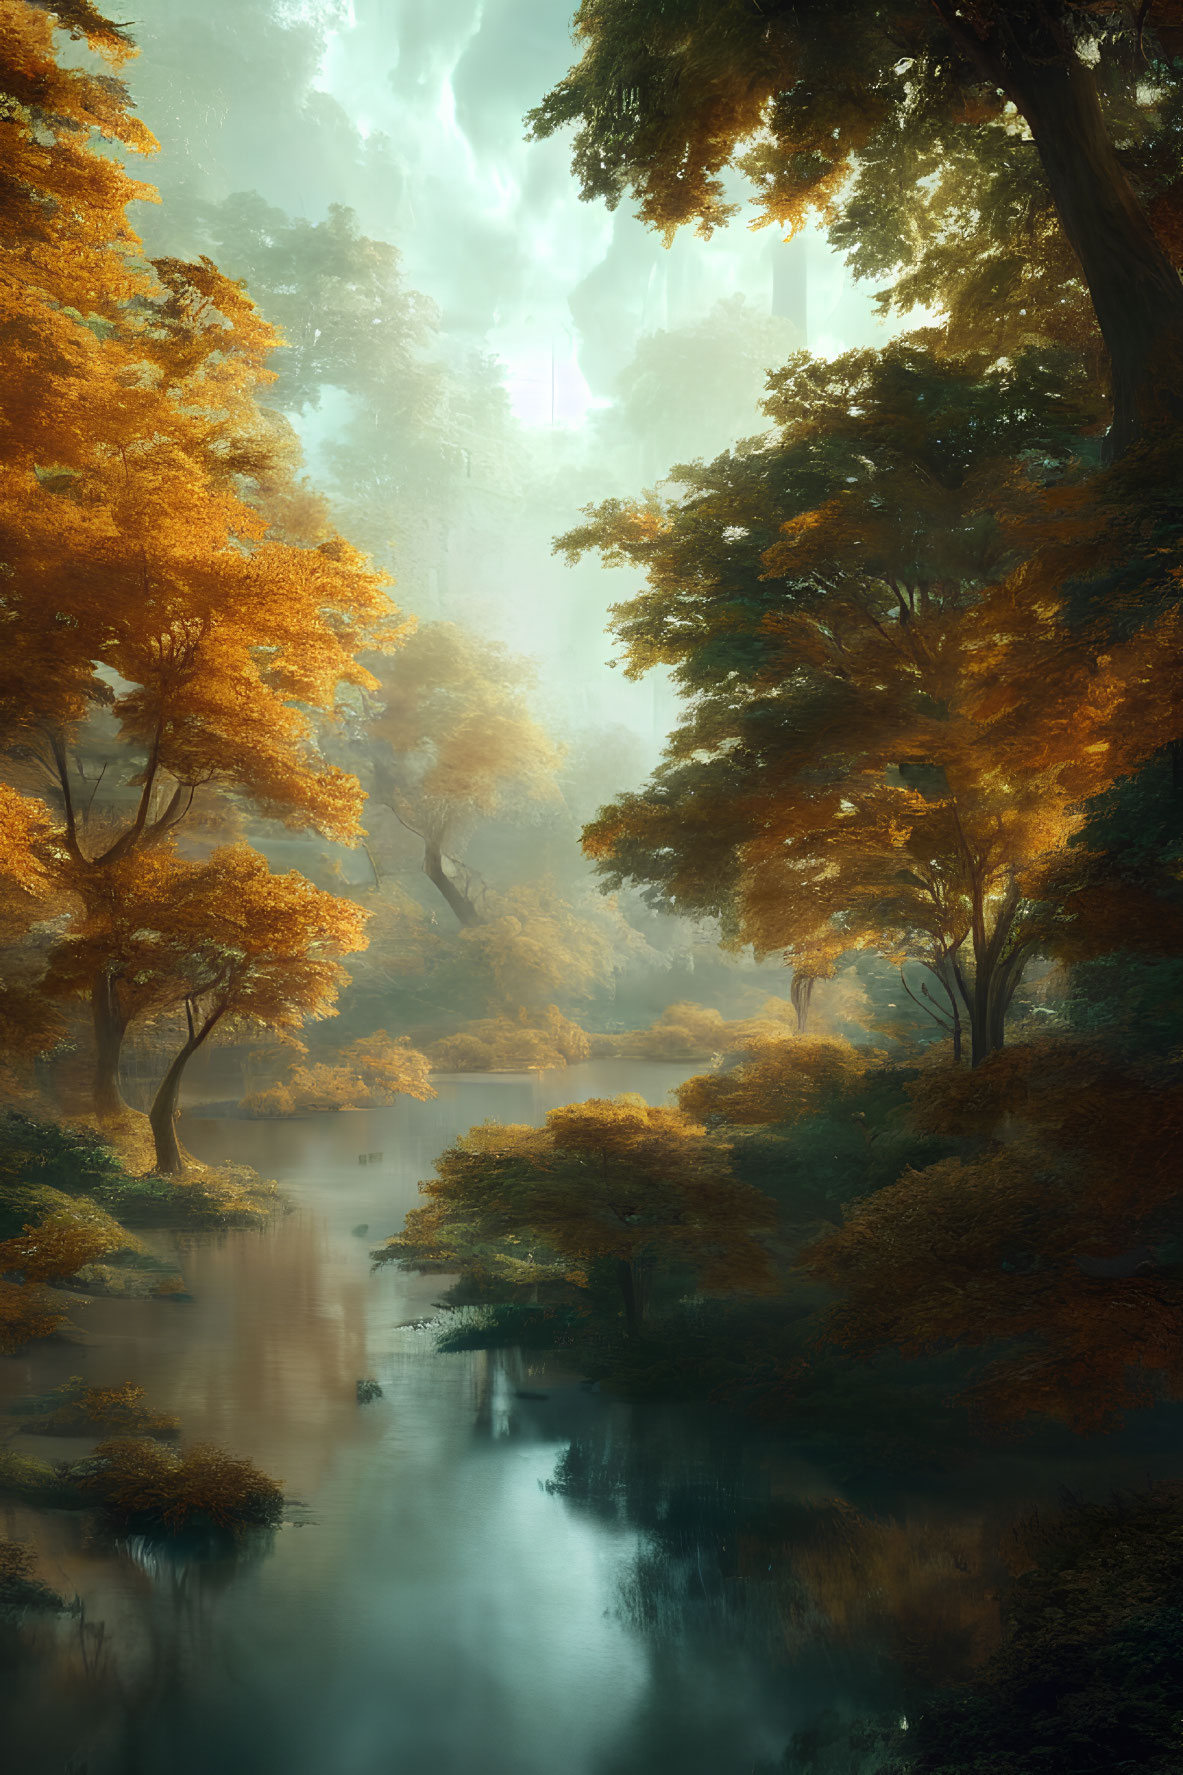 Ethereal forest scene with golden-orange foliage, towering trees, meandering river, and soft light